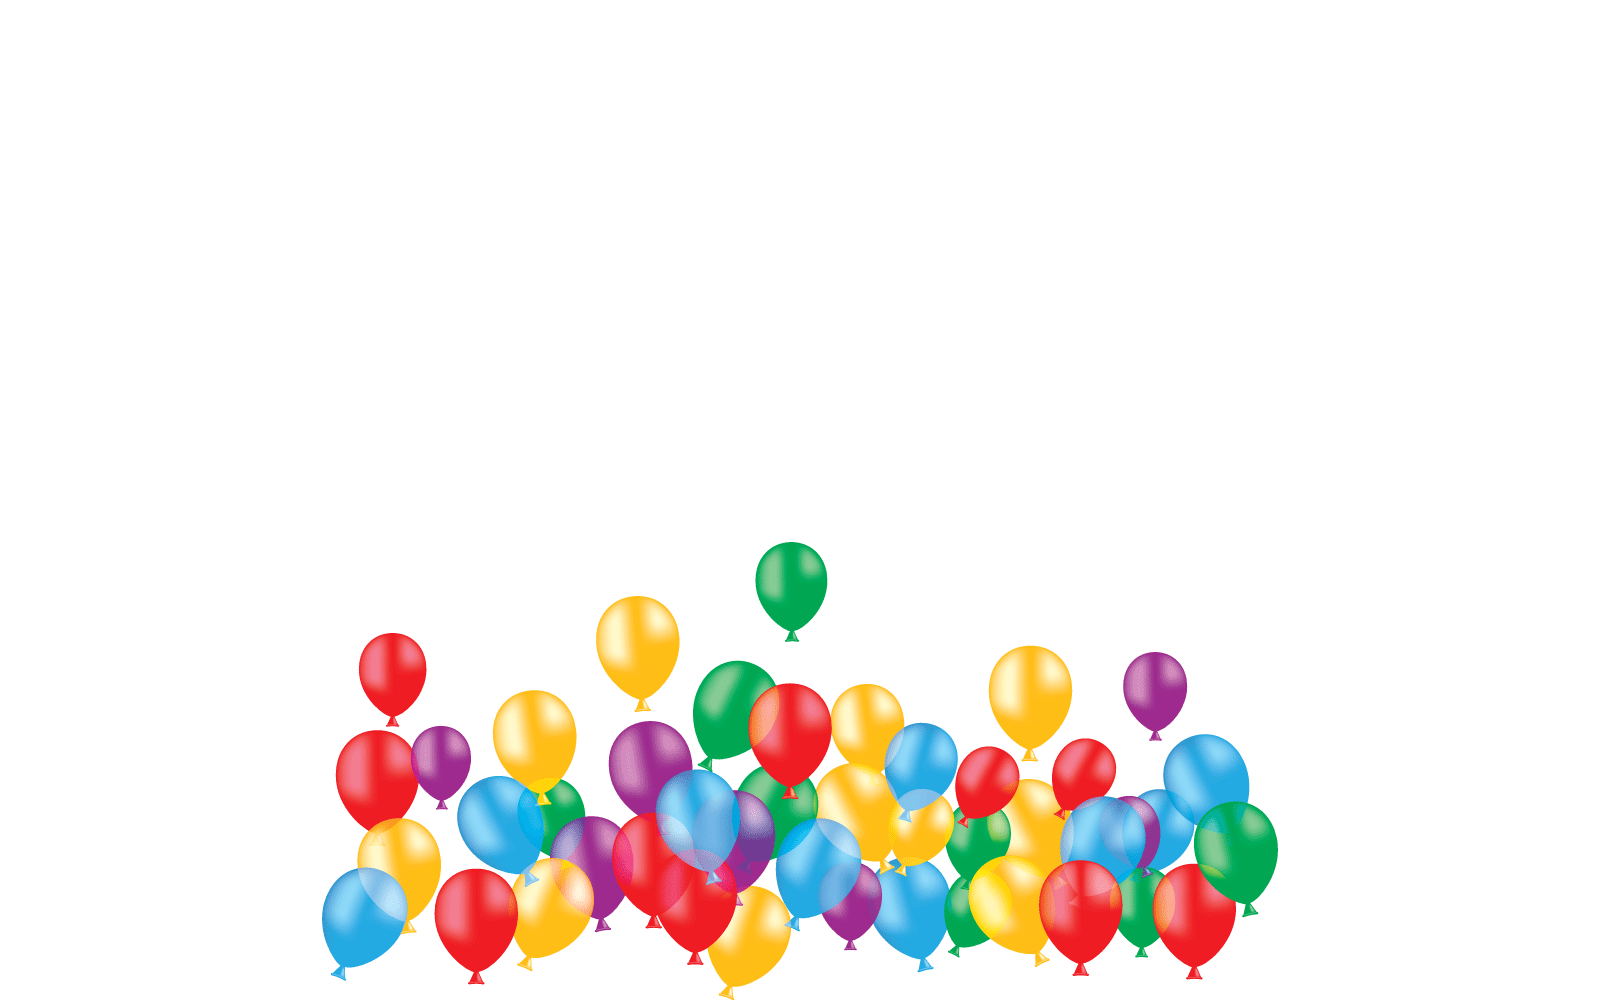 Realistic balloon design vector on white background